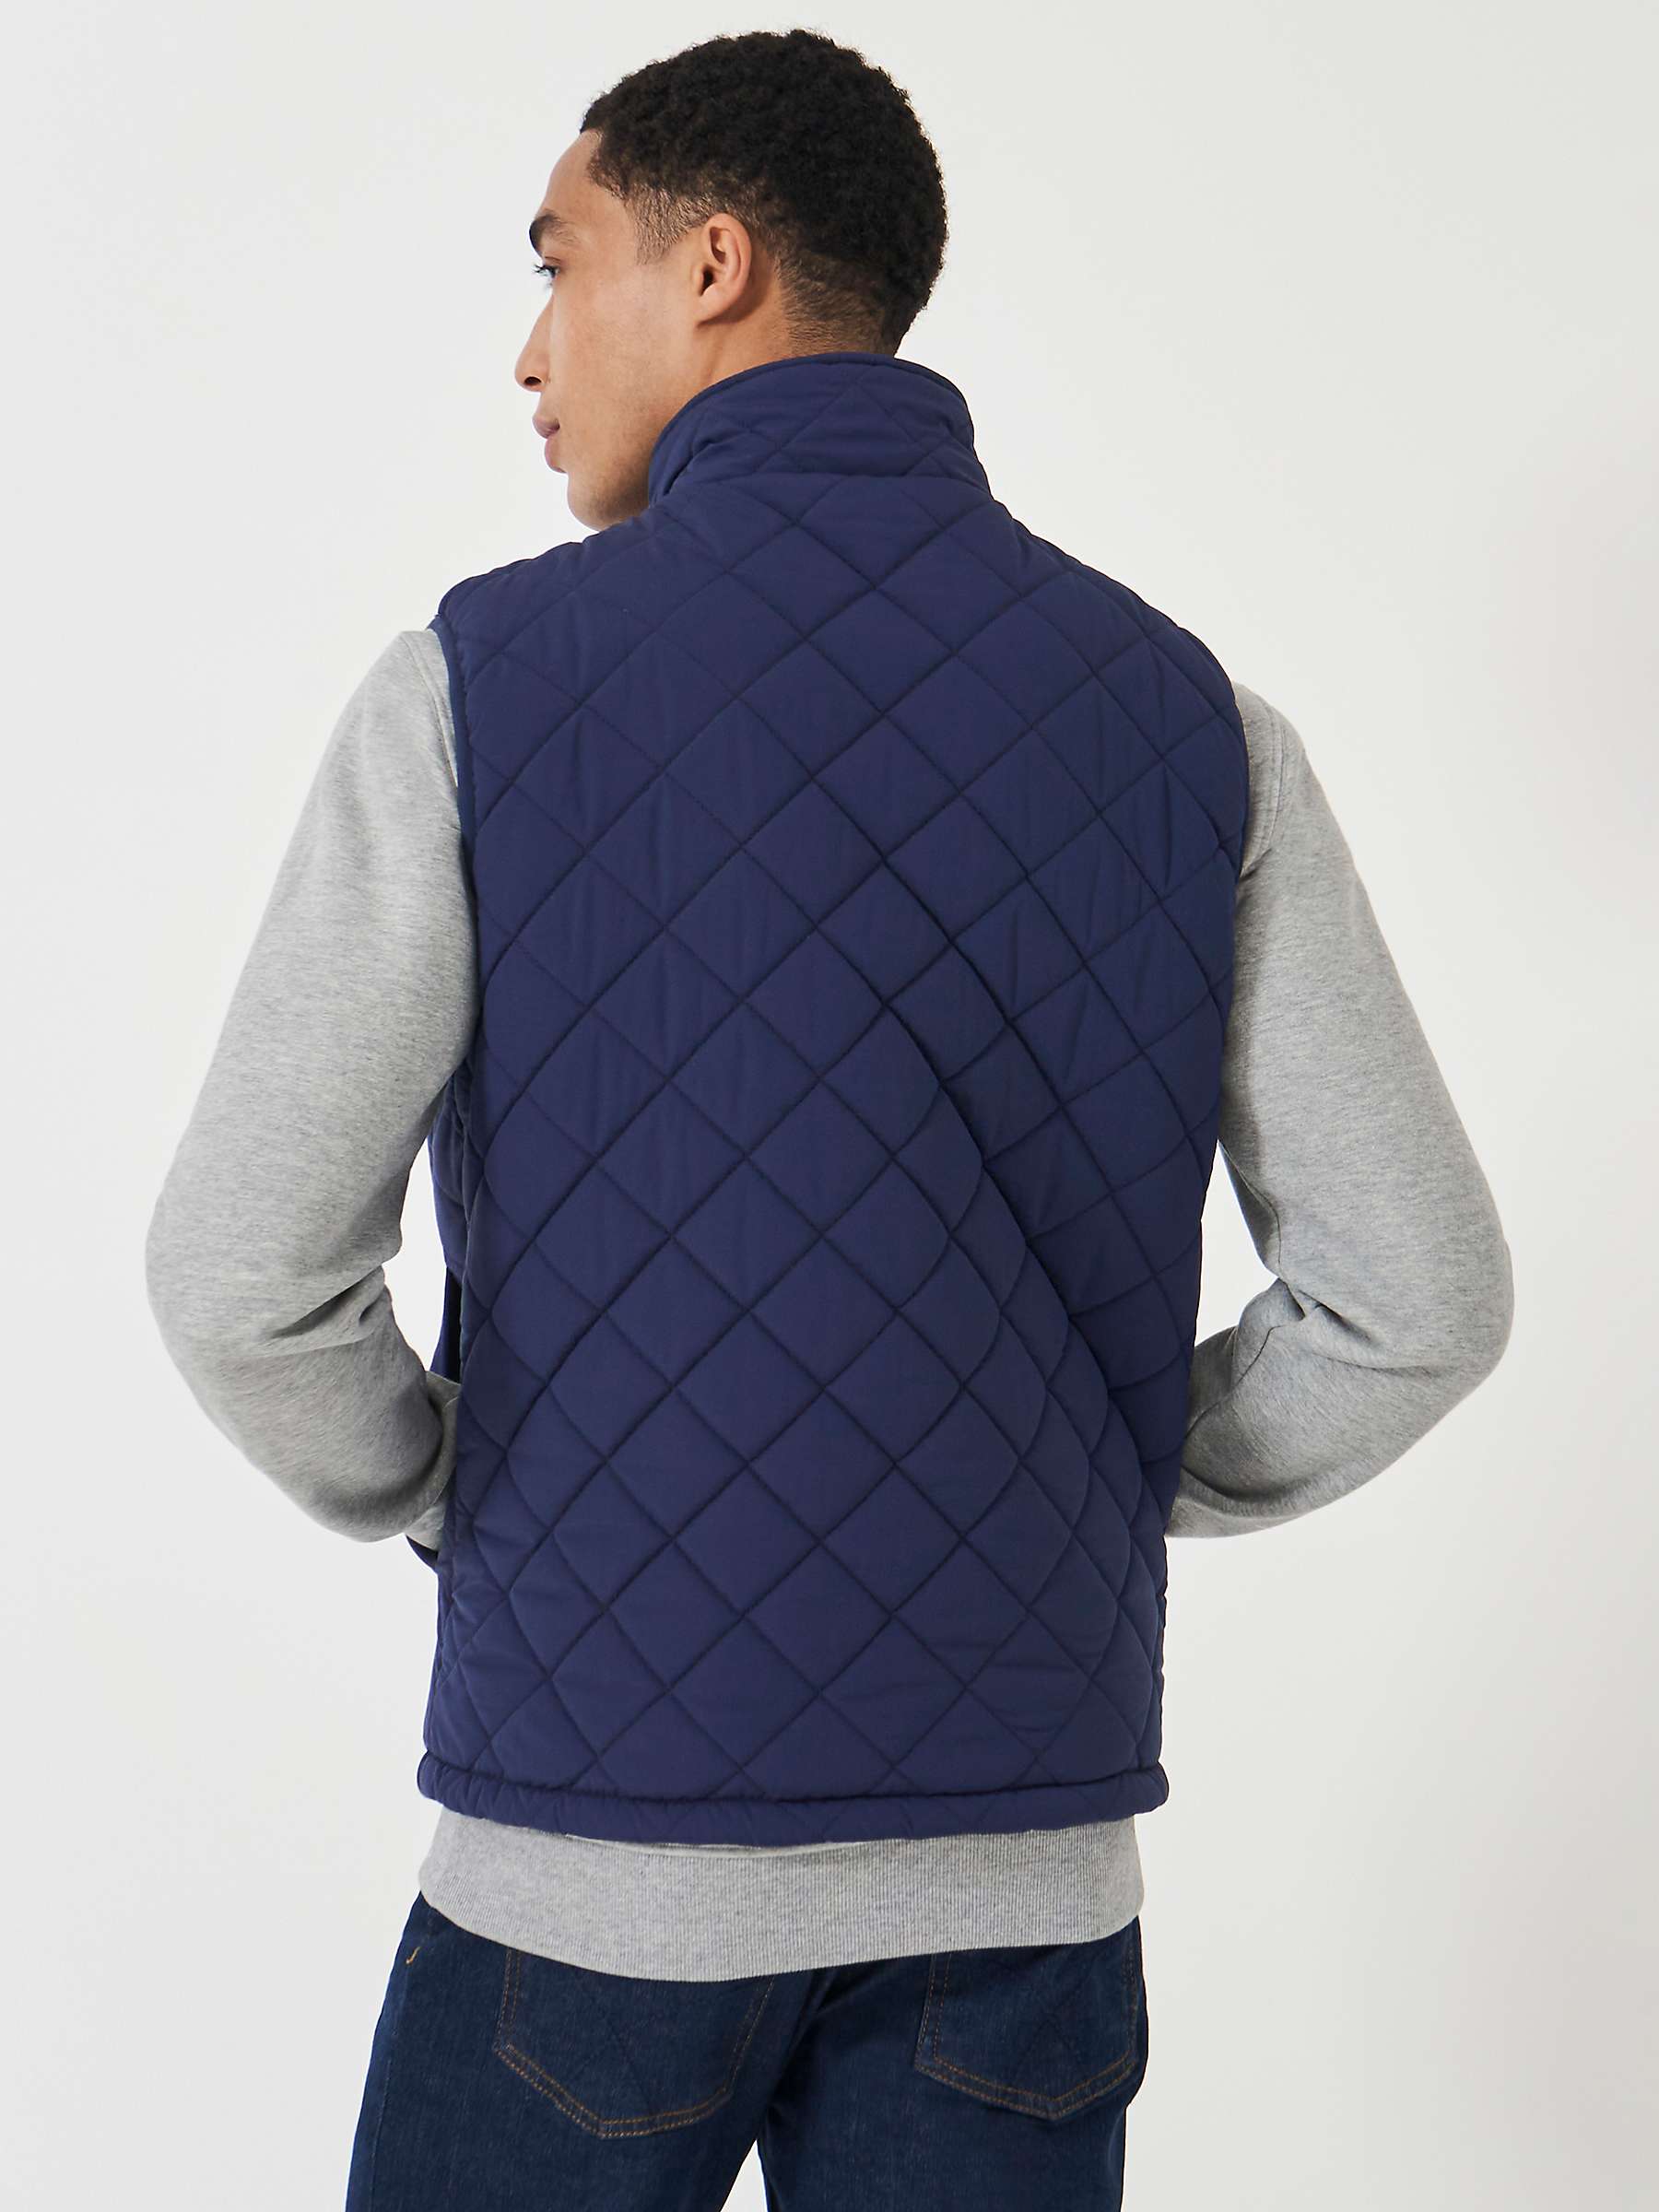 Buy Crew Clothing Diamond Quilted Gilet, Navy Online at johnlewis.com